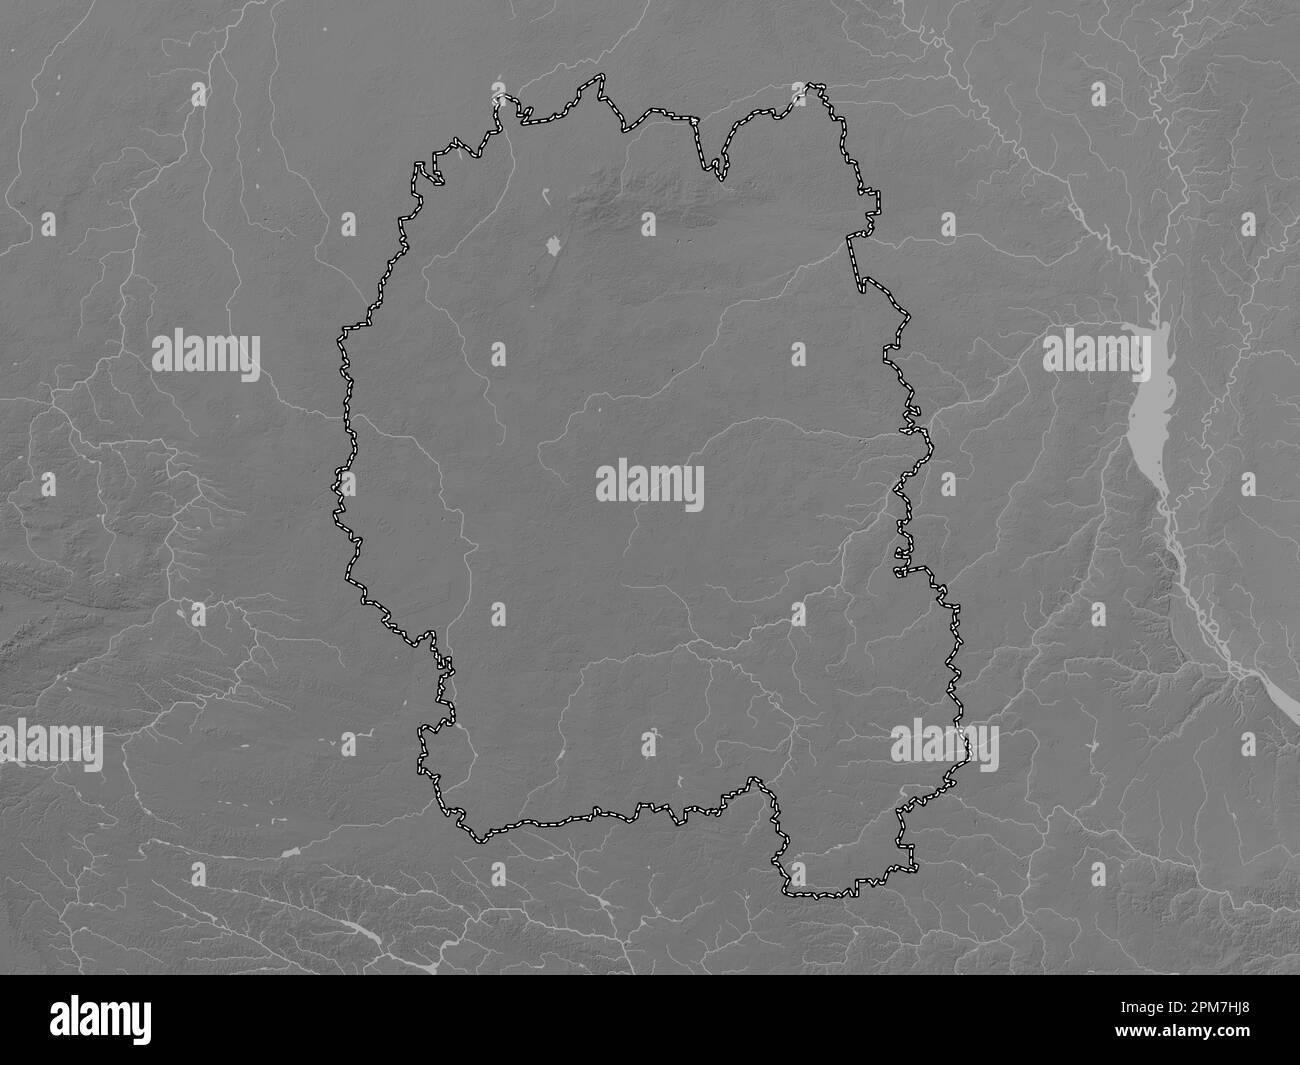 Zhytomyr, region of Ukraine. Grayscale elevation map with lakes and rivers Stock Photo